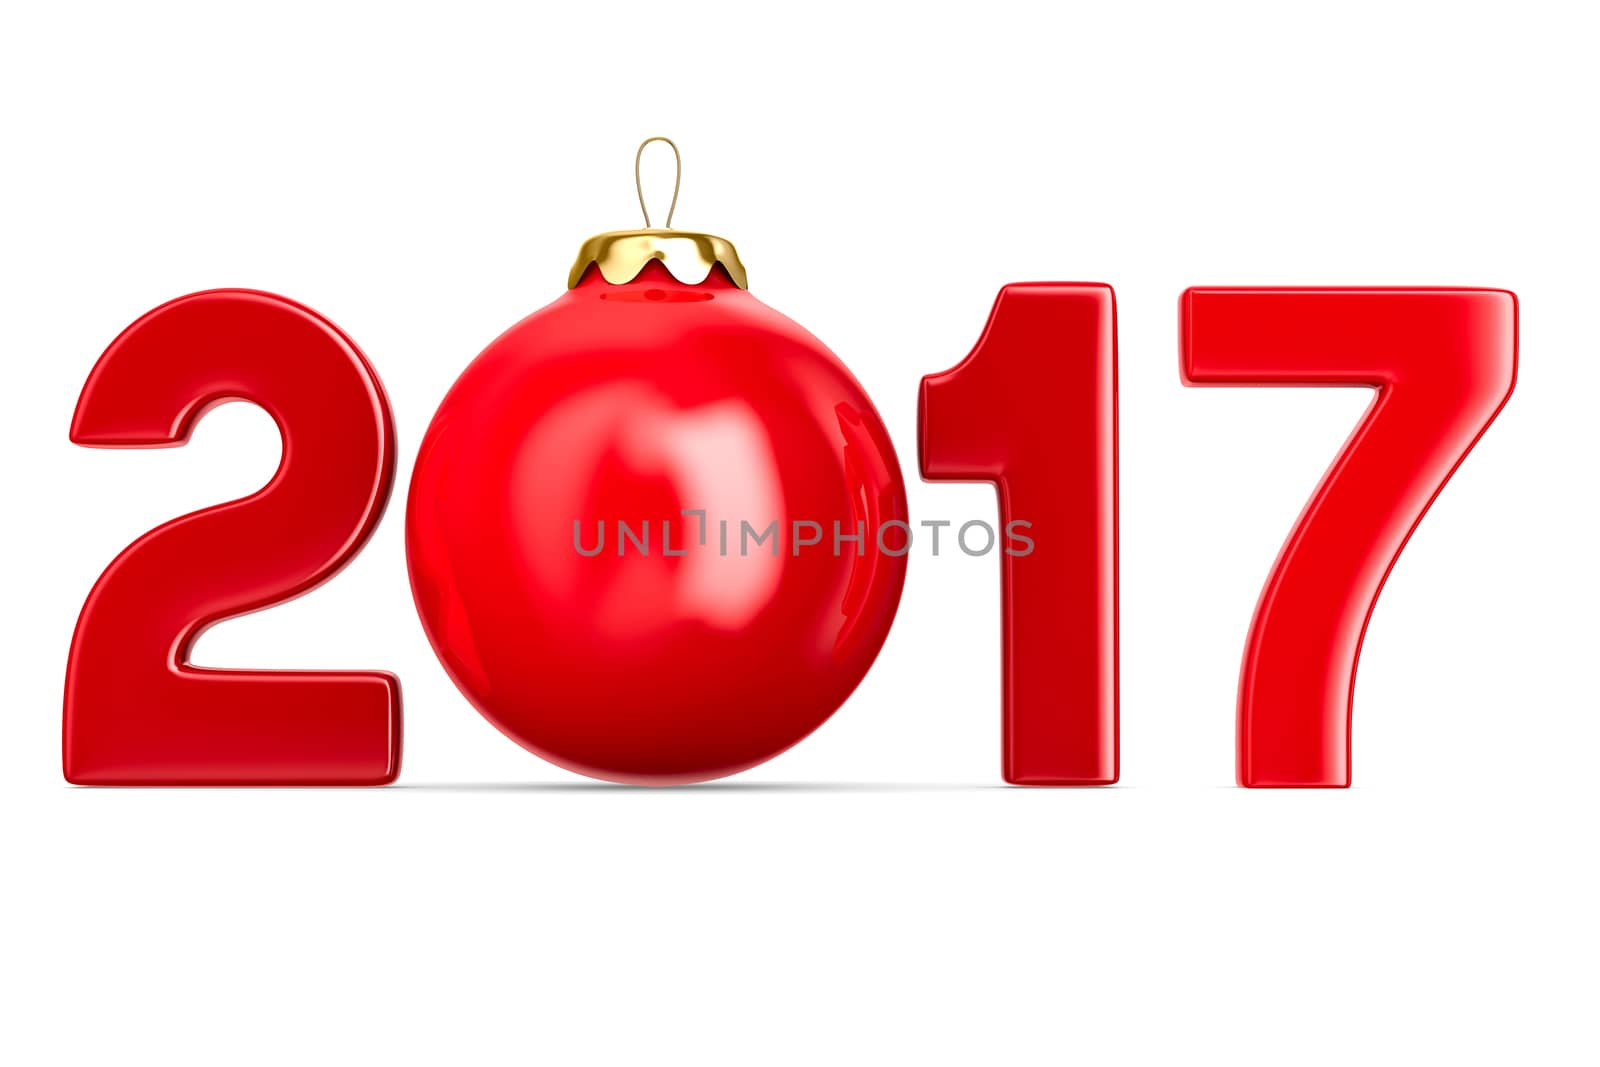 2017 new year. Isolated 3D image